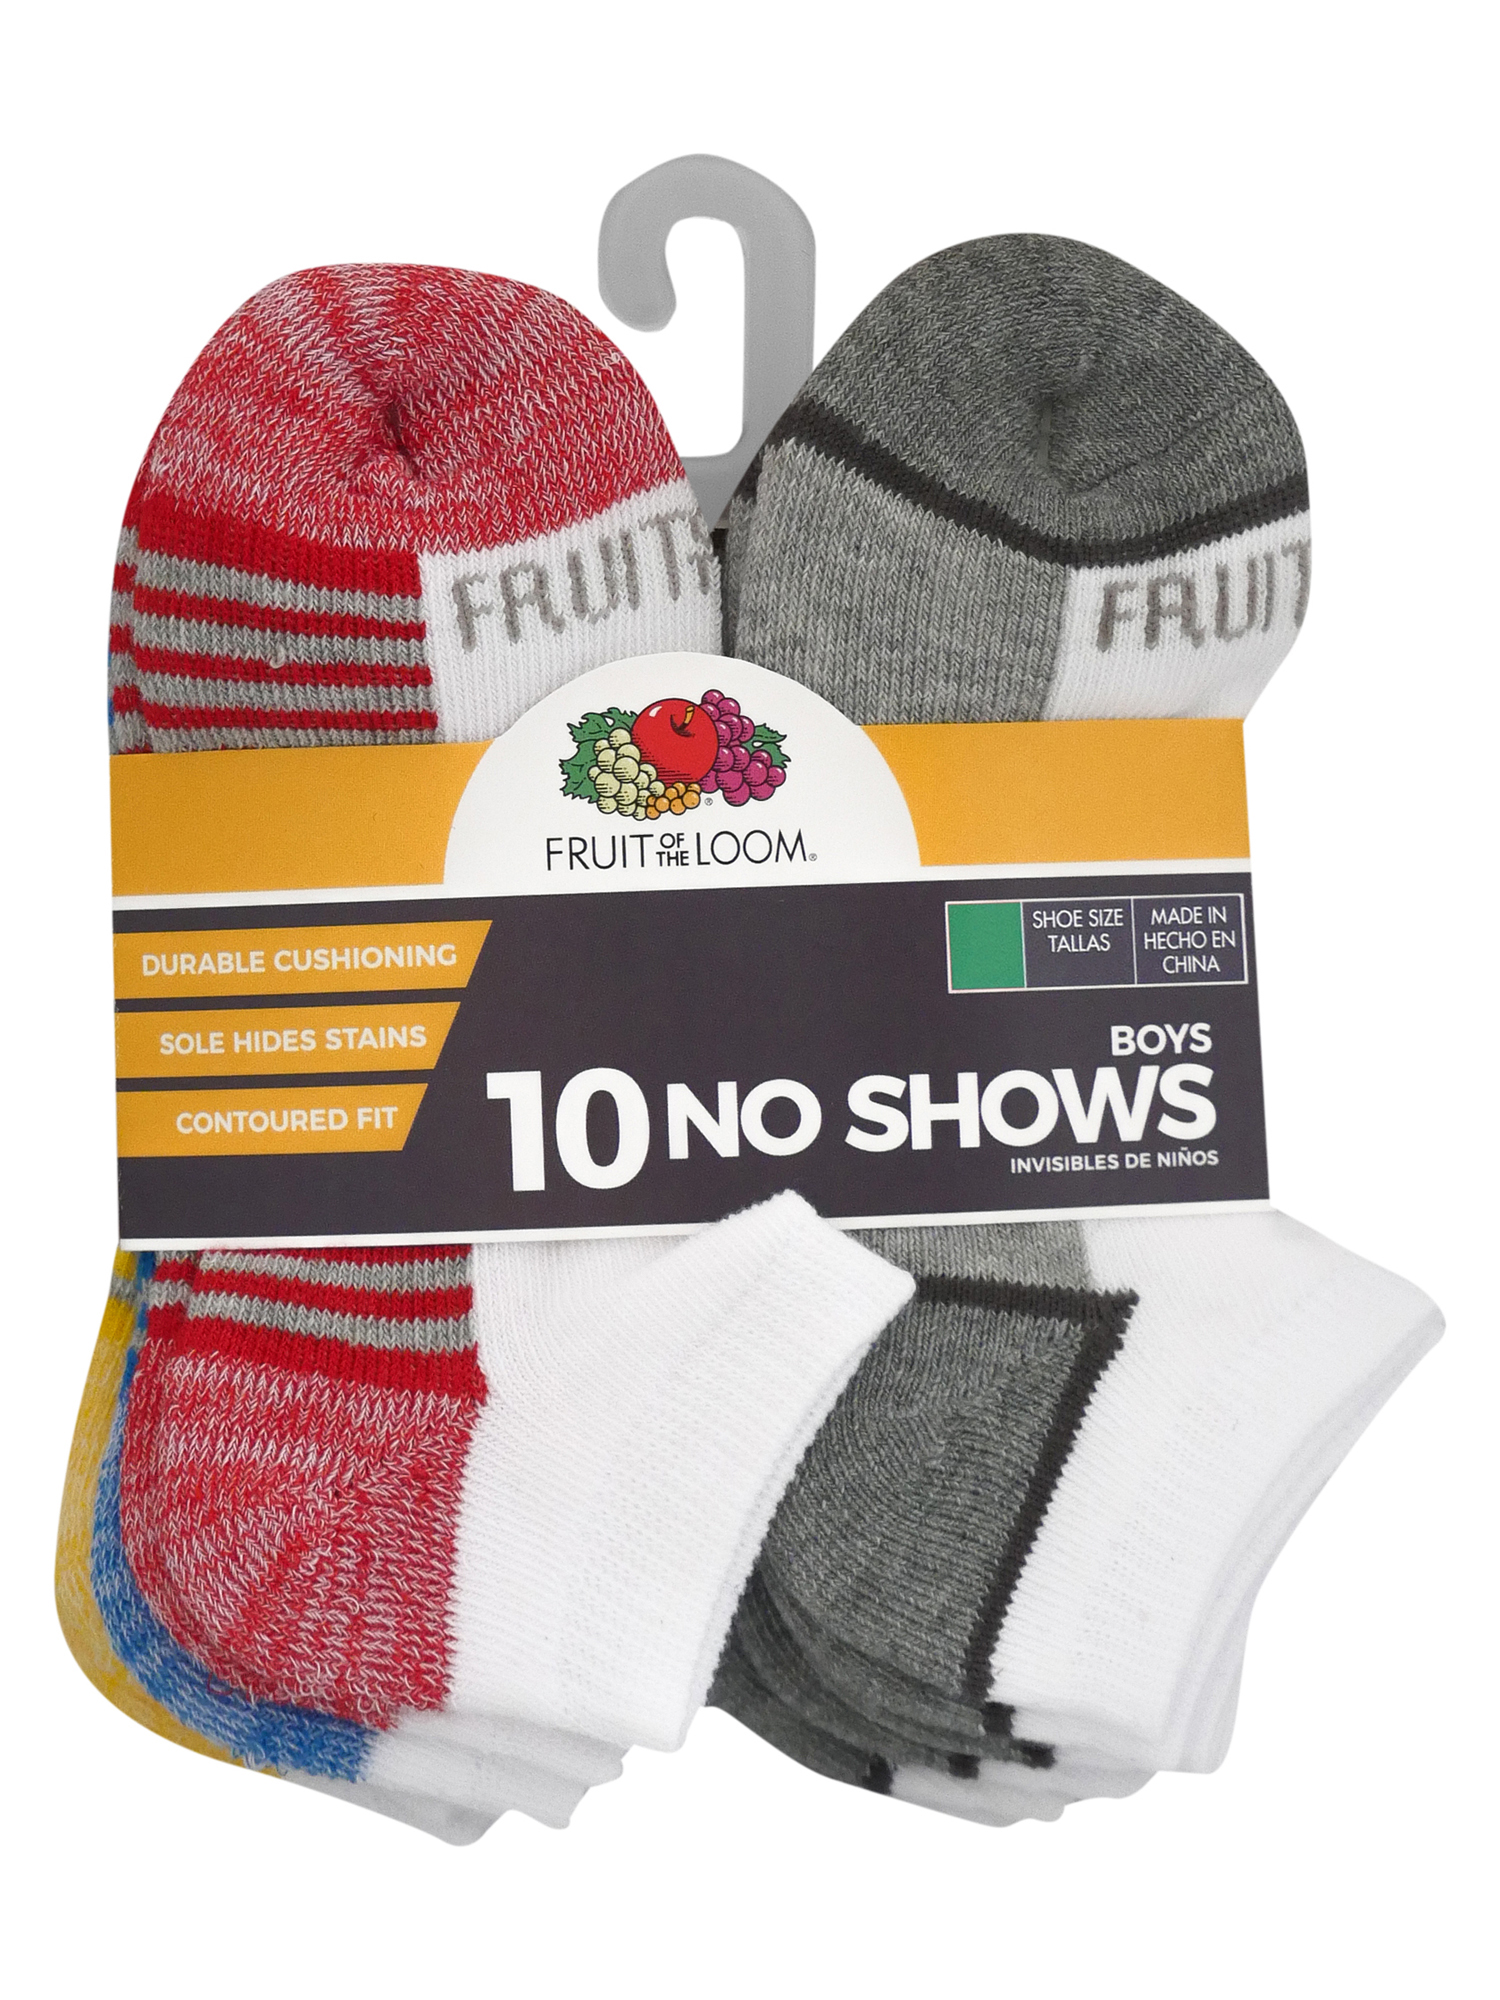 Fruit of the Loom Boys Socks, No Show Zone Cushion 10 Pack Sizes S - L - image 2 of 4